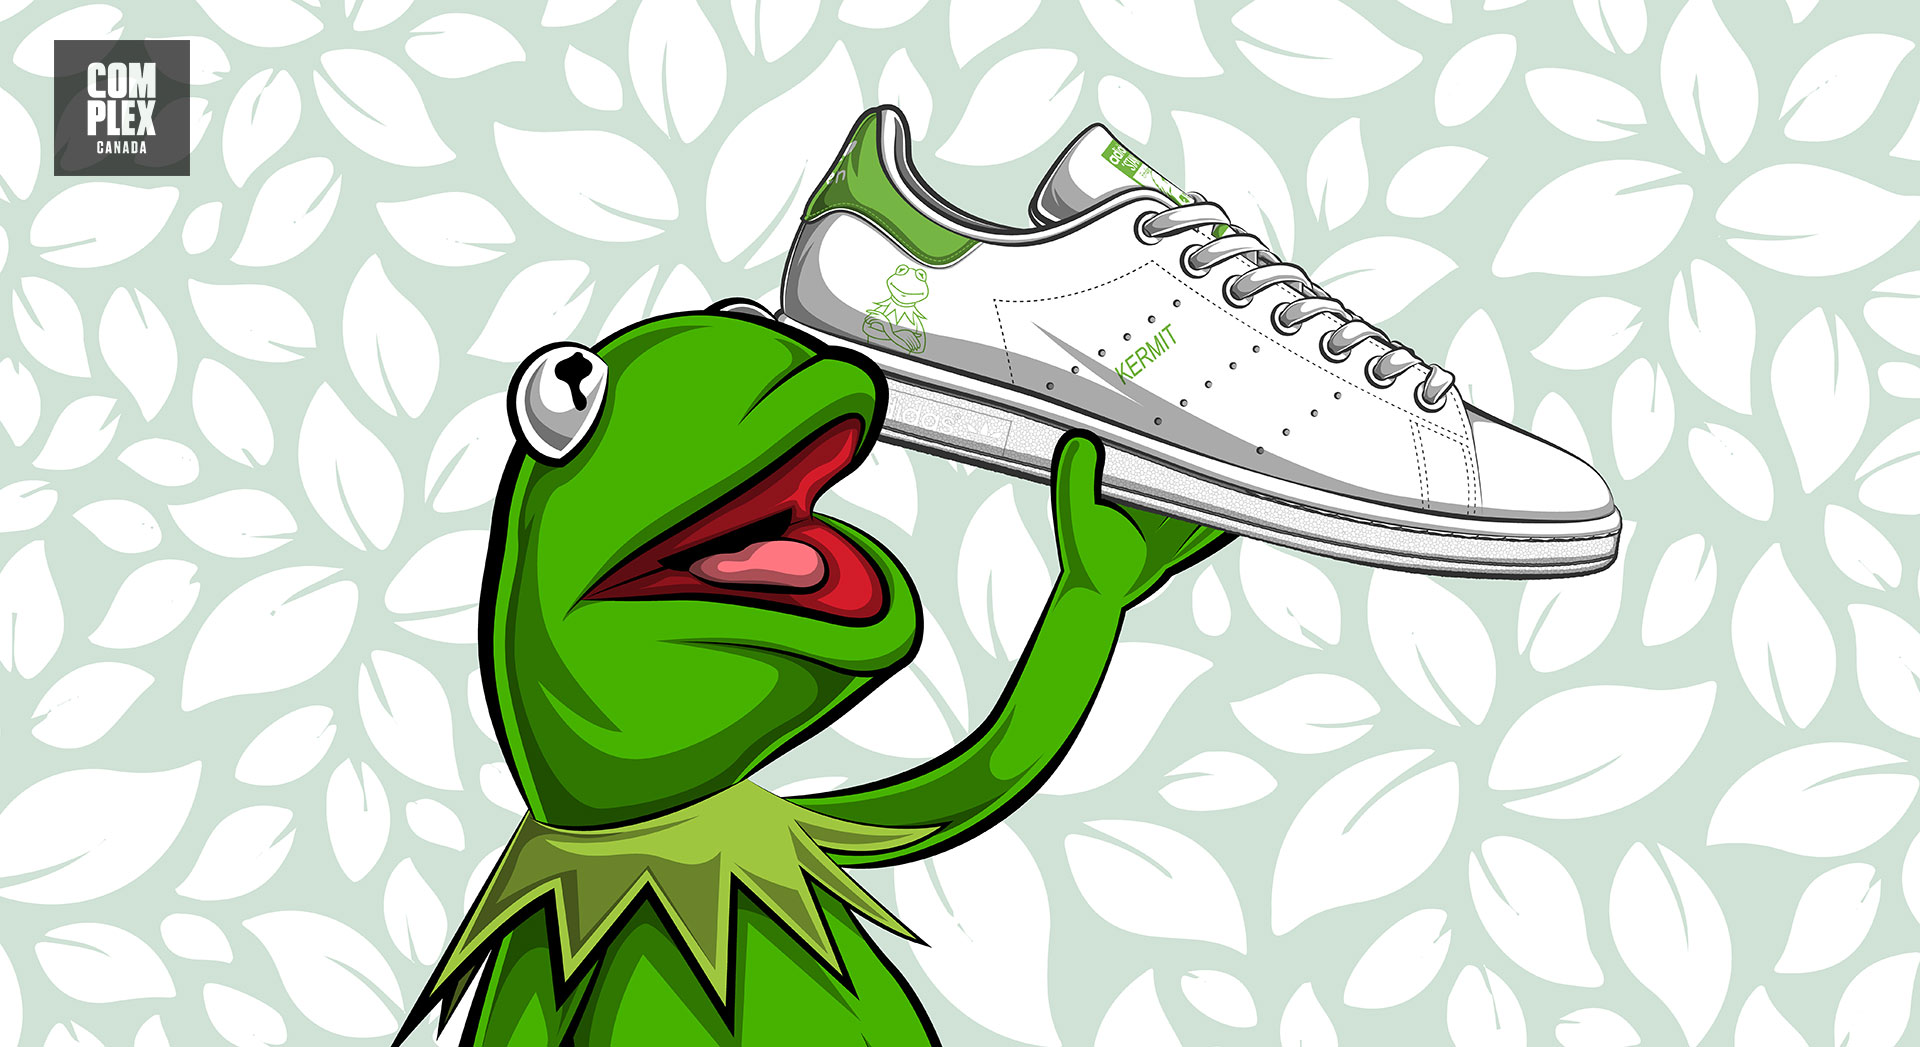 Kermit the Frog and the adidas Stan Smith—Name a Greener Duo | Complex